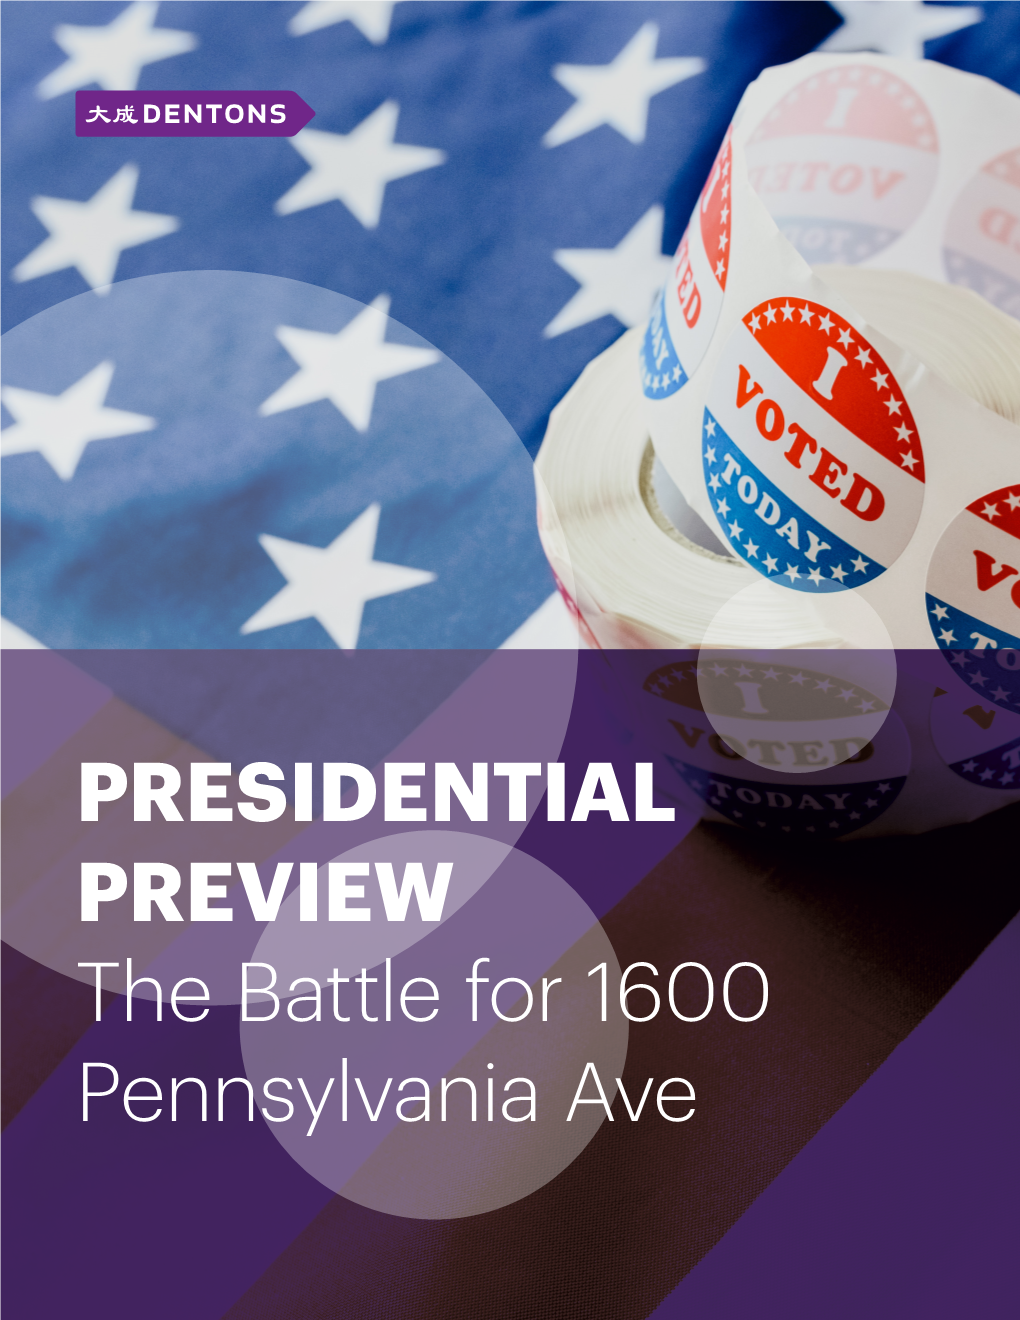 PRESIDENTIAL PREVIEW the Battle for 1600 Pennsylvania Ave